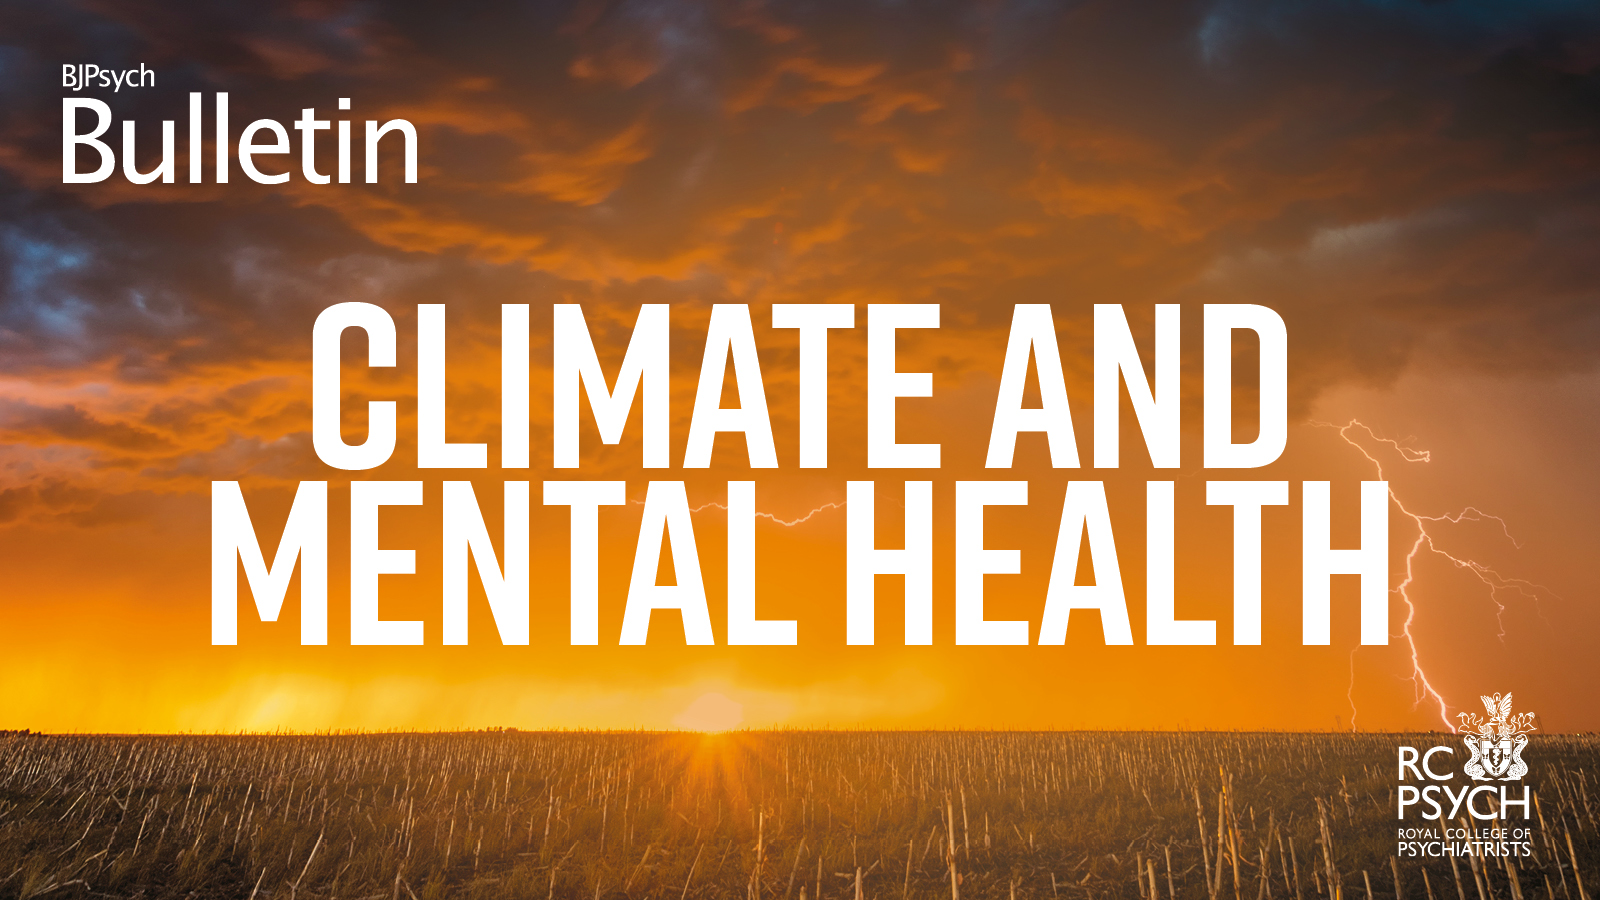 BJB Climate and Mental Health Twitter Banner